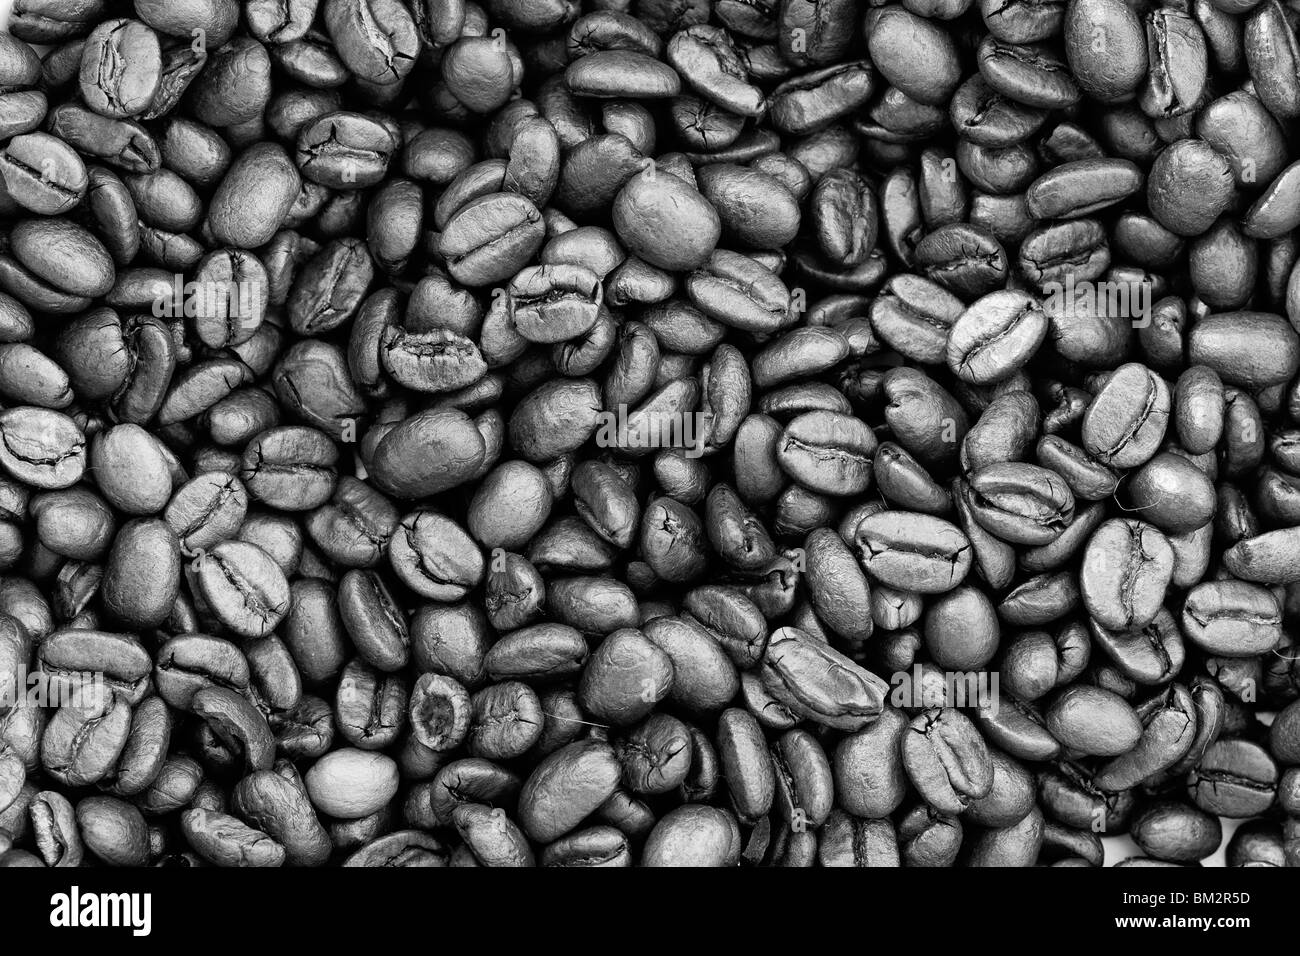 Coffee Beans Black and White Stock Photos & Images - Alamy